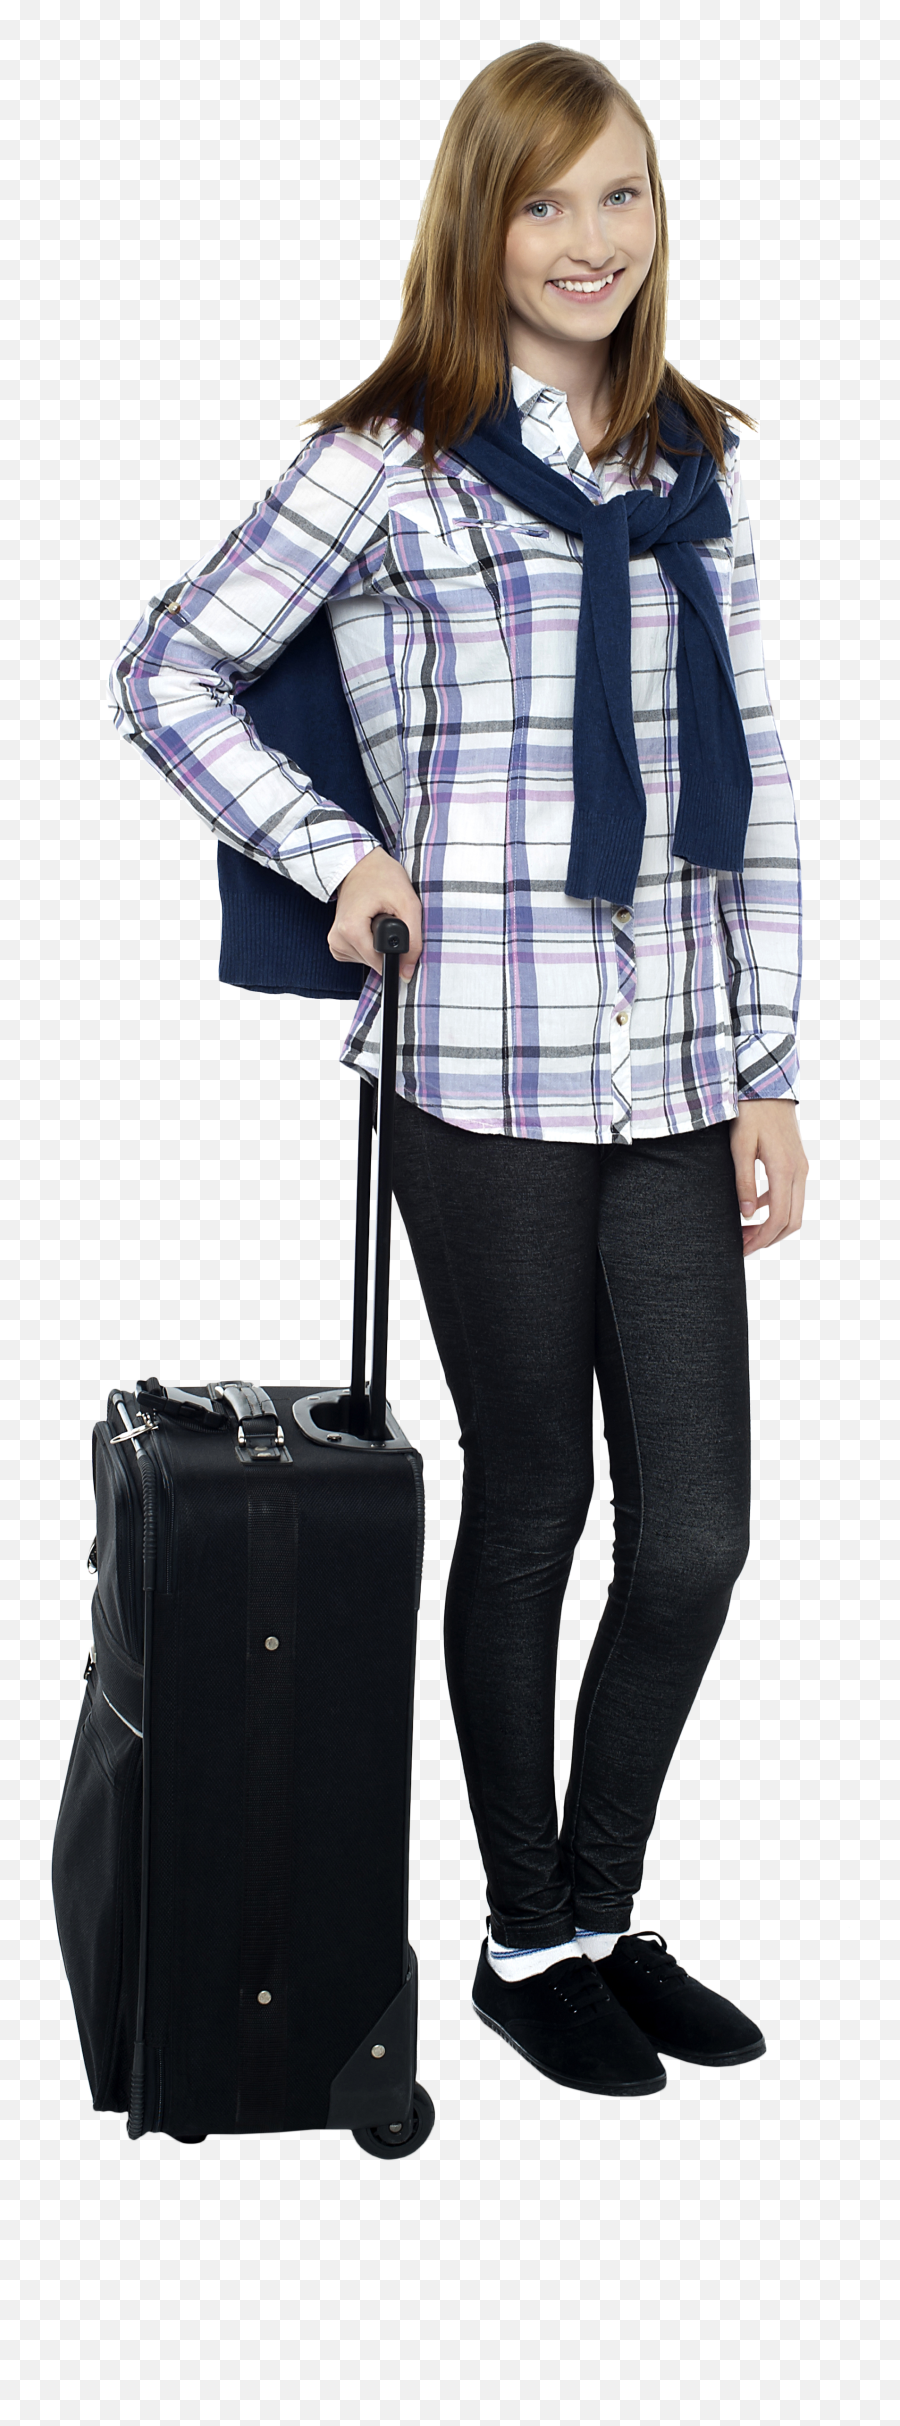 Download Teenage Girl Png Image For Free - Travel Girl With Bag Png,Teen Png